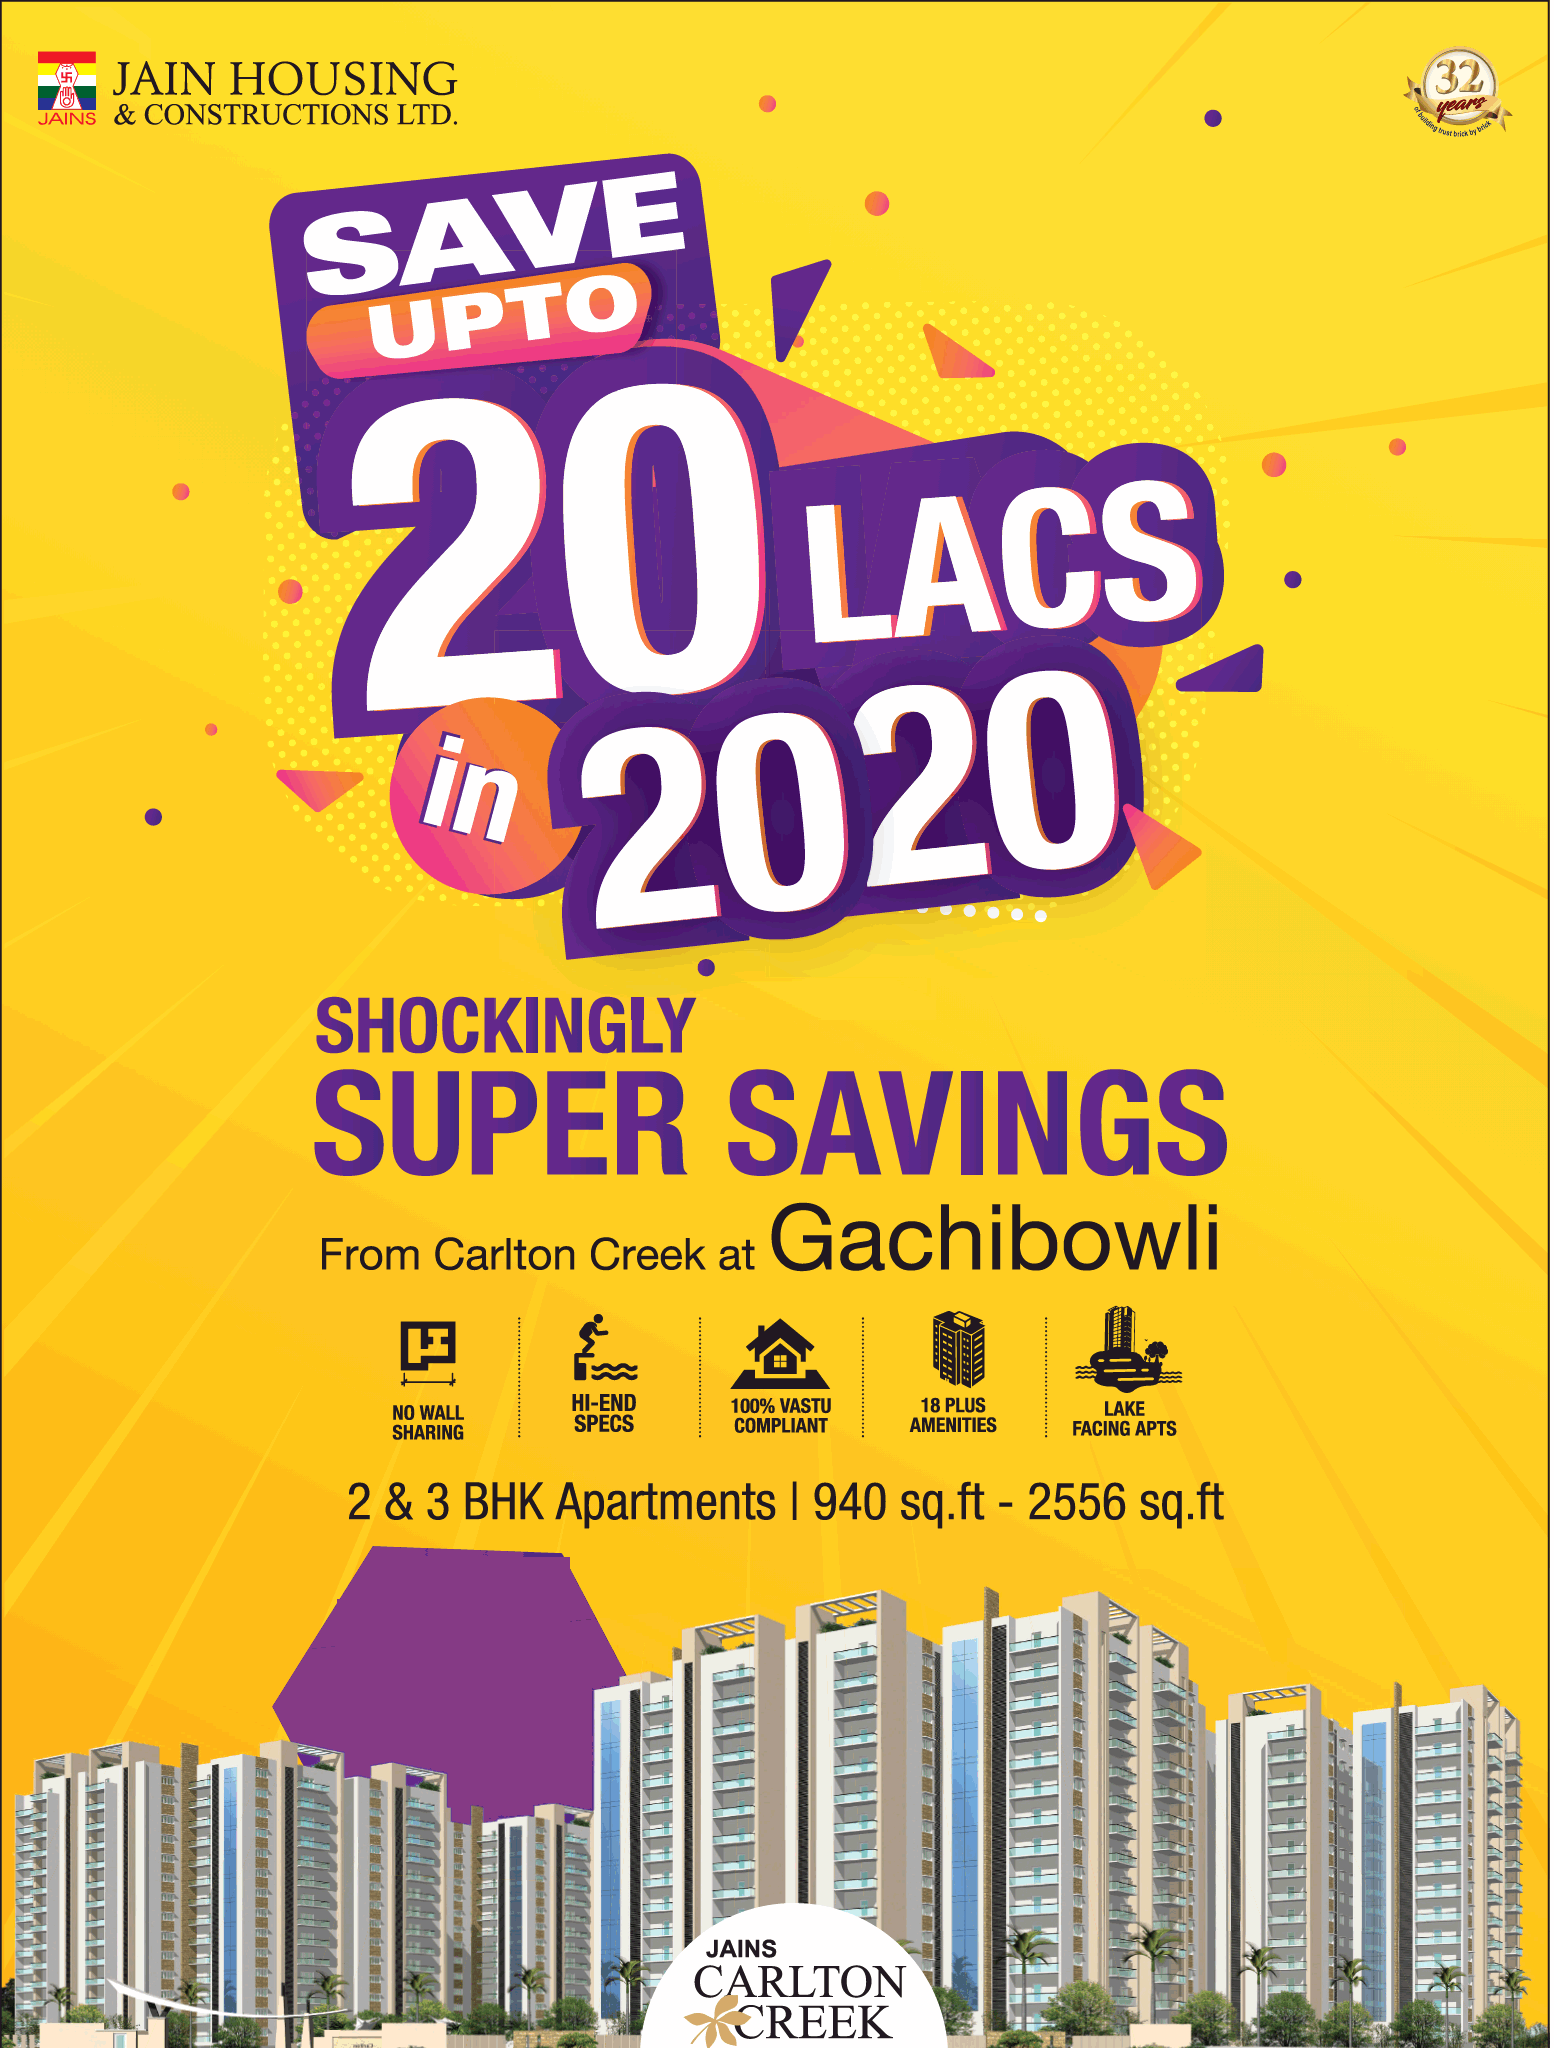 Save up to 20 lakh in 2020 at Jains Carlton Creek in Hyderabad